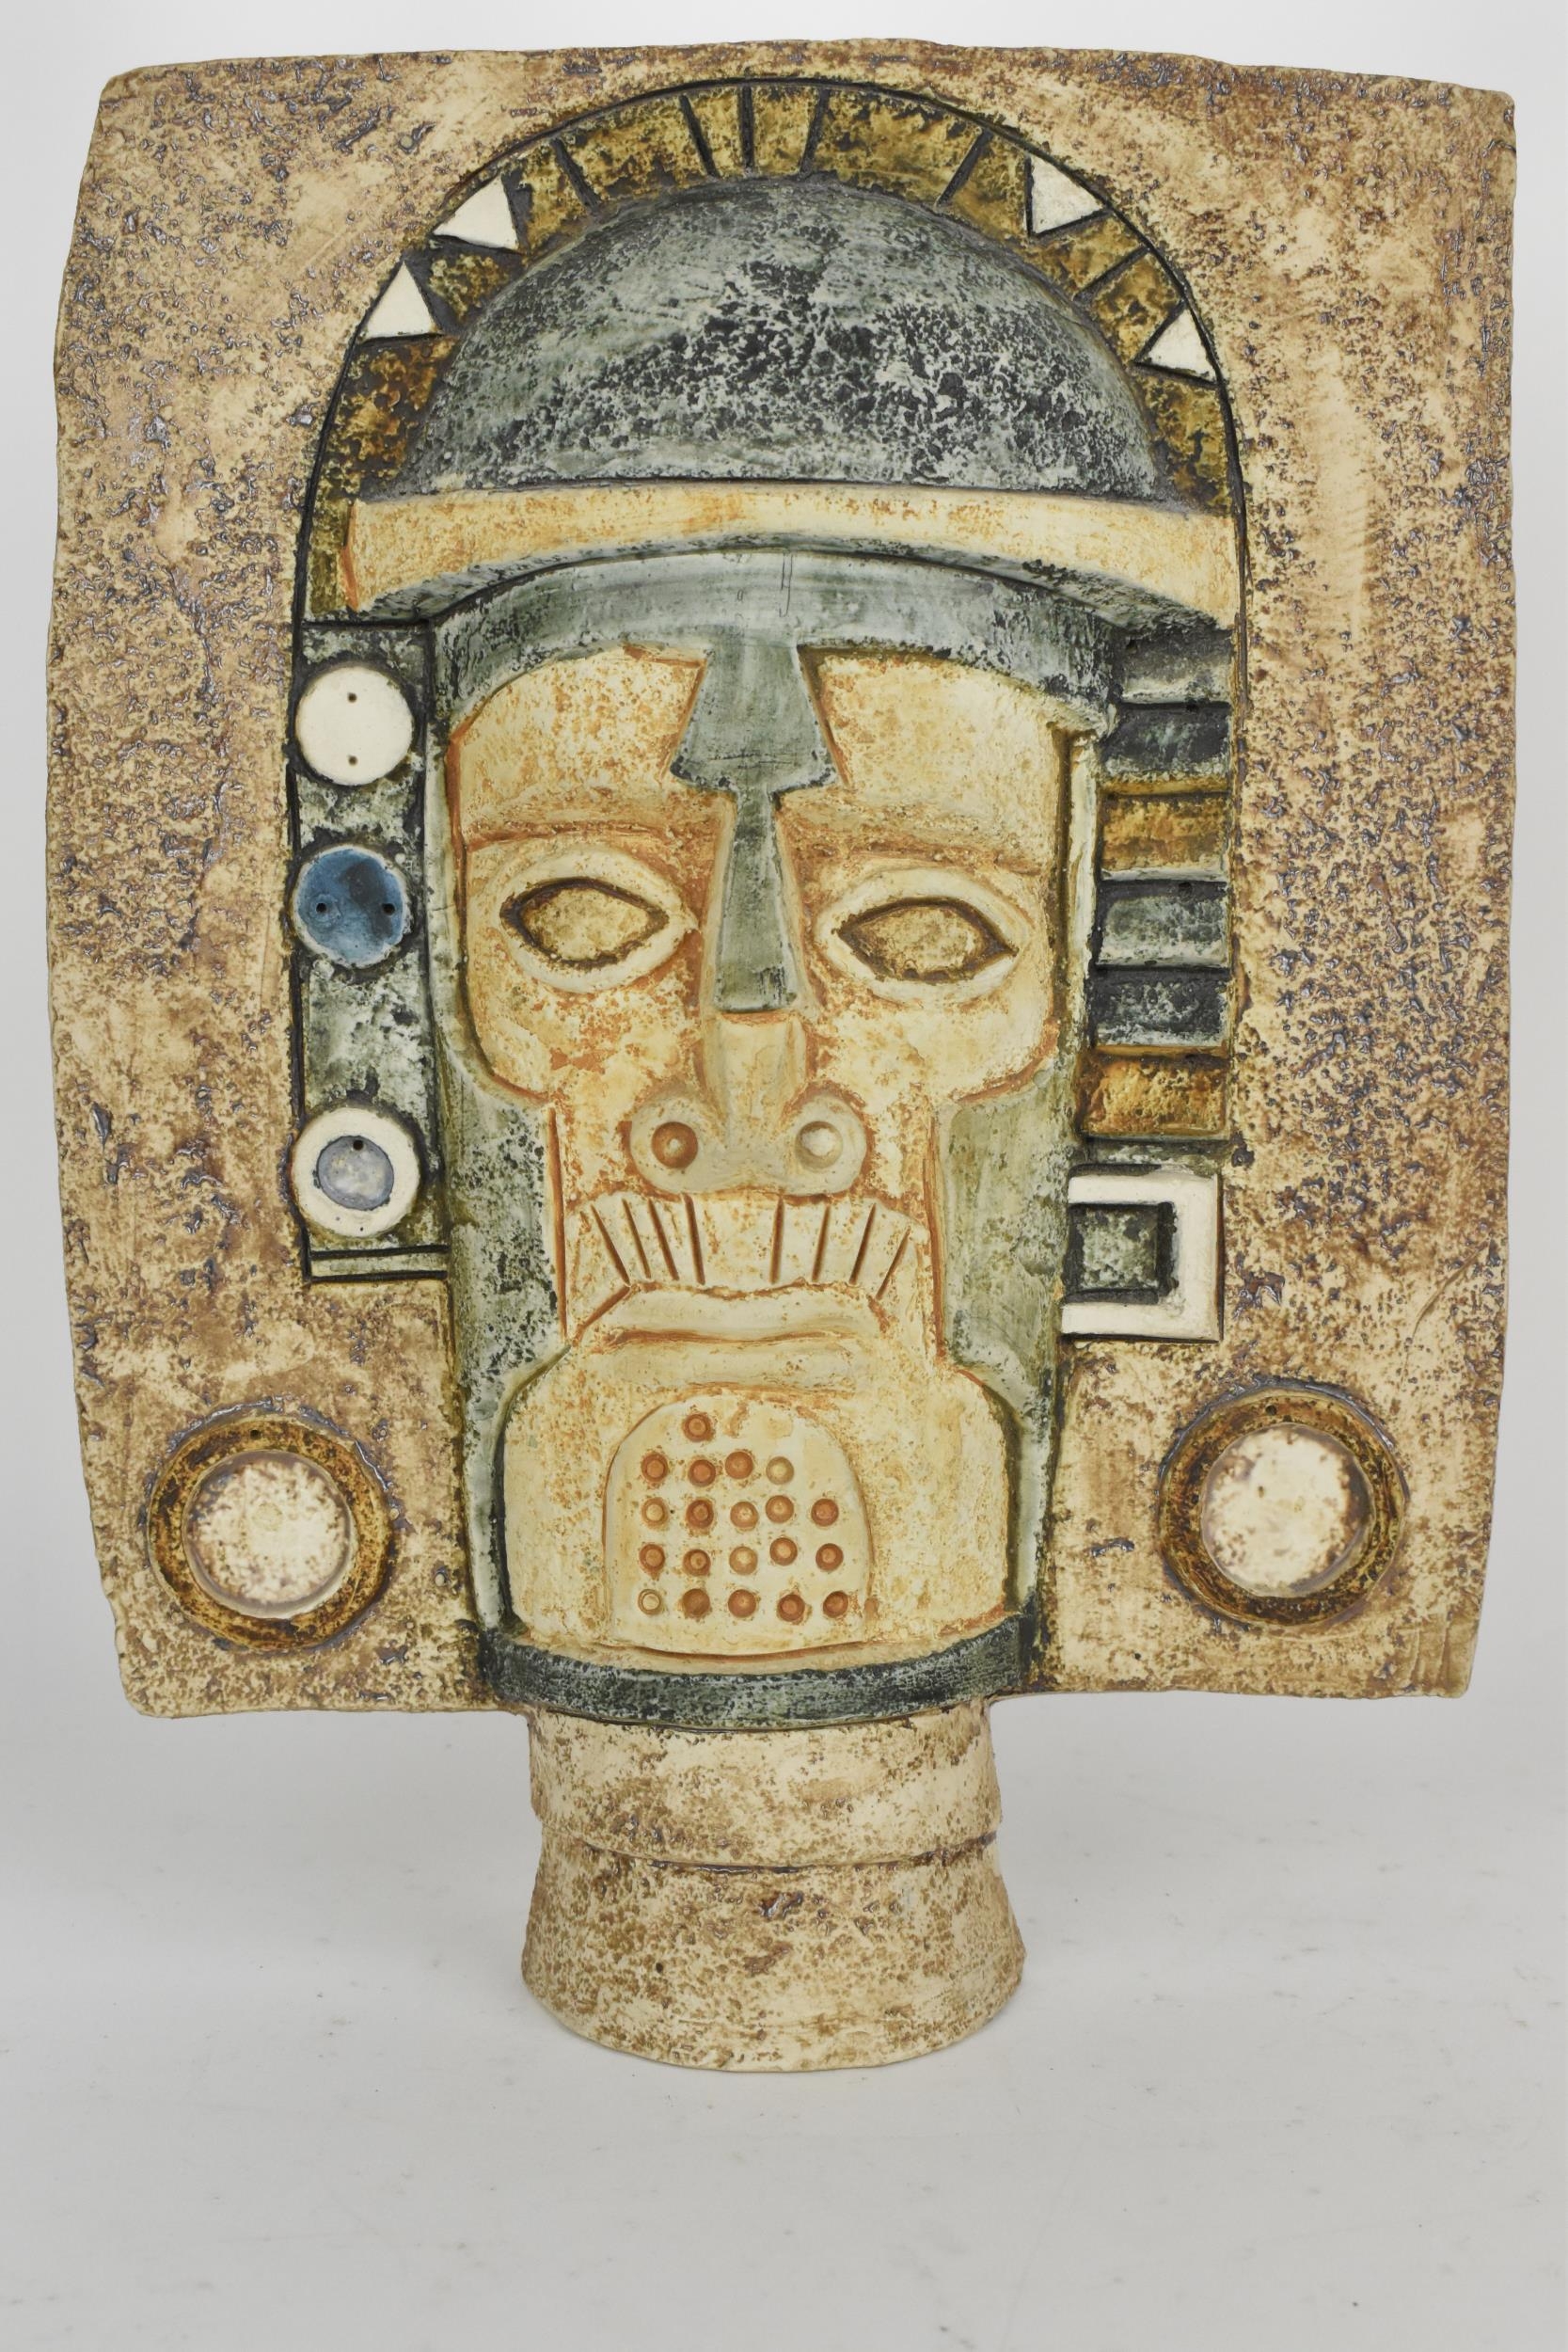 A Troika mask with incised and textured 'Aztec' decoration, monogrammed AW for Annette Walters circa